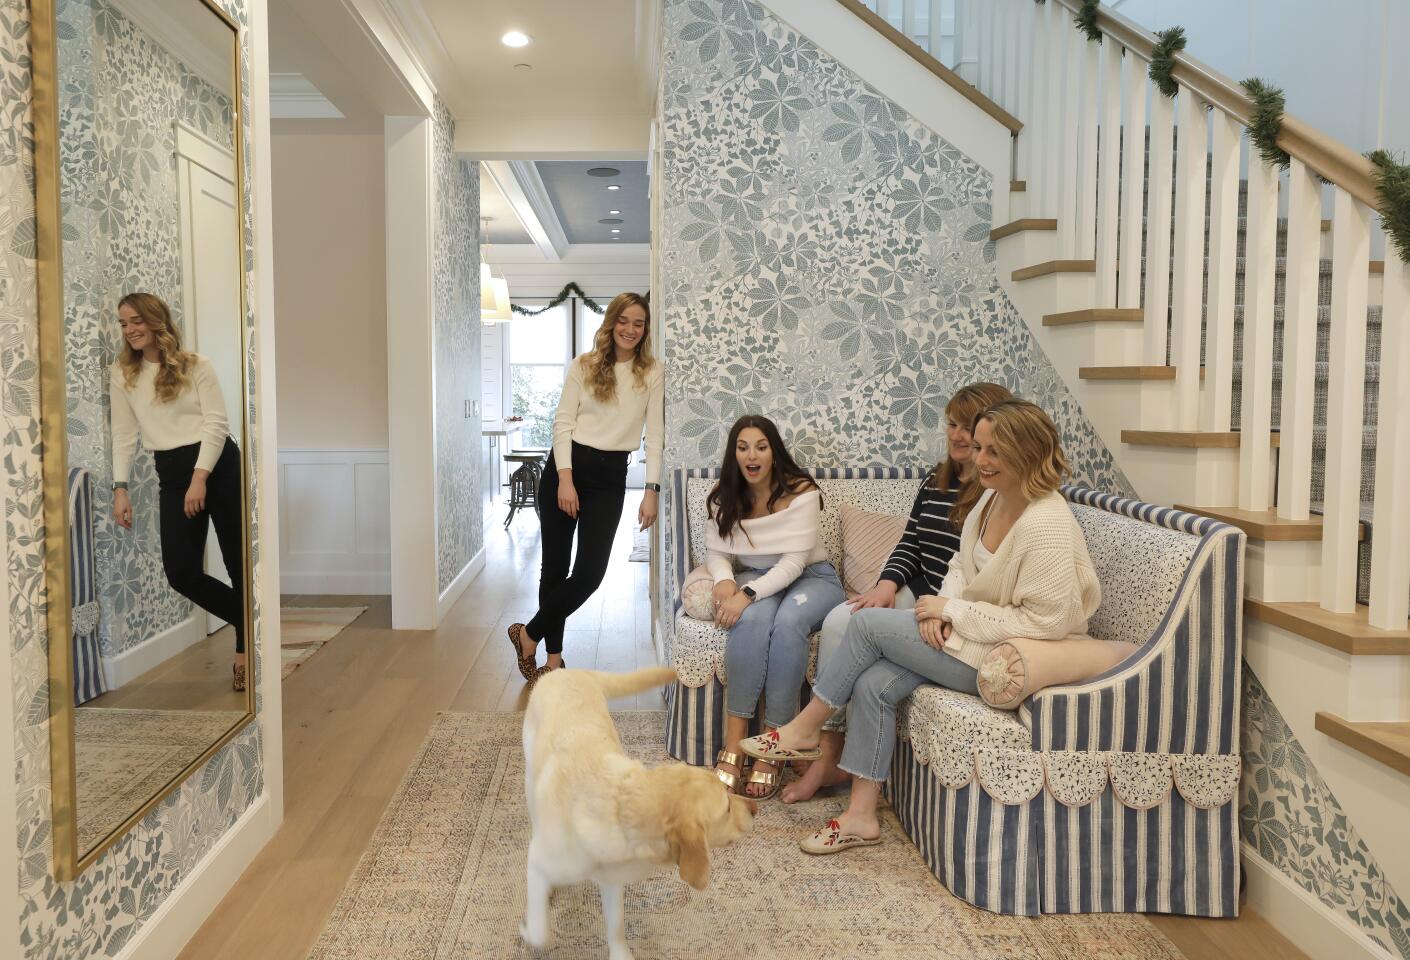 Victoria Aveyard, second from left, shares her house with her dog Indy; roommates Tori Ahl, far right; Morgan Bowser, second from right. Jen Rohrs, left, is a former roommate. The author of the popular young adult fantasy series, “Red Queen,” bought her “modern farmhouse” in 2017.